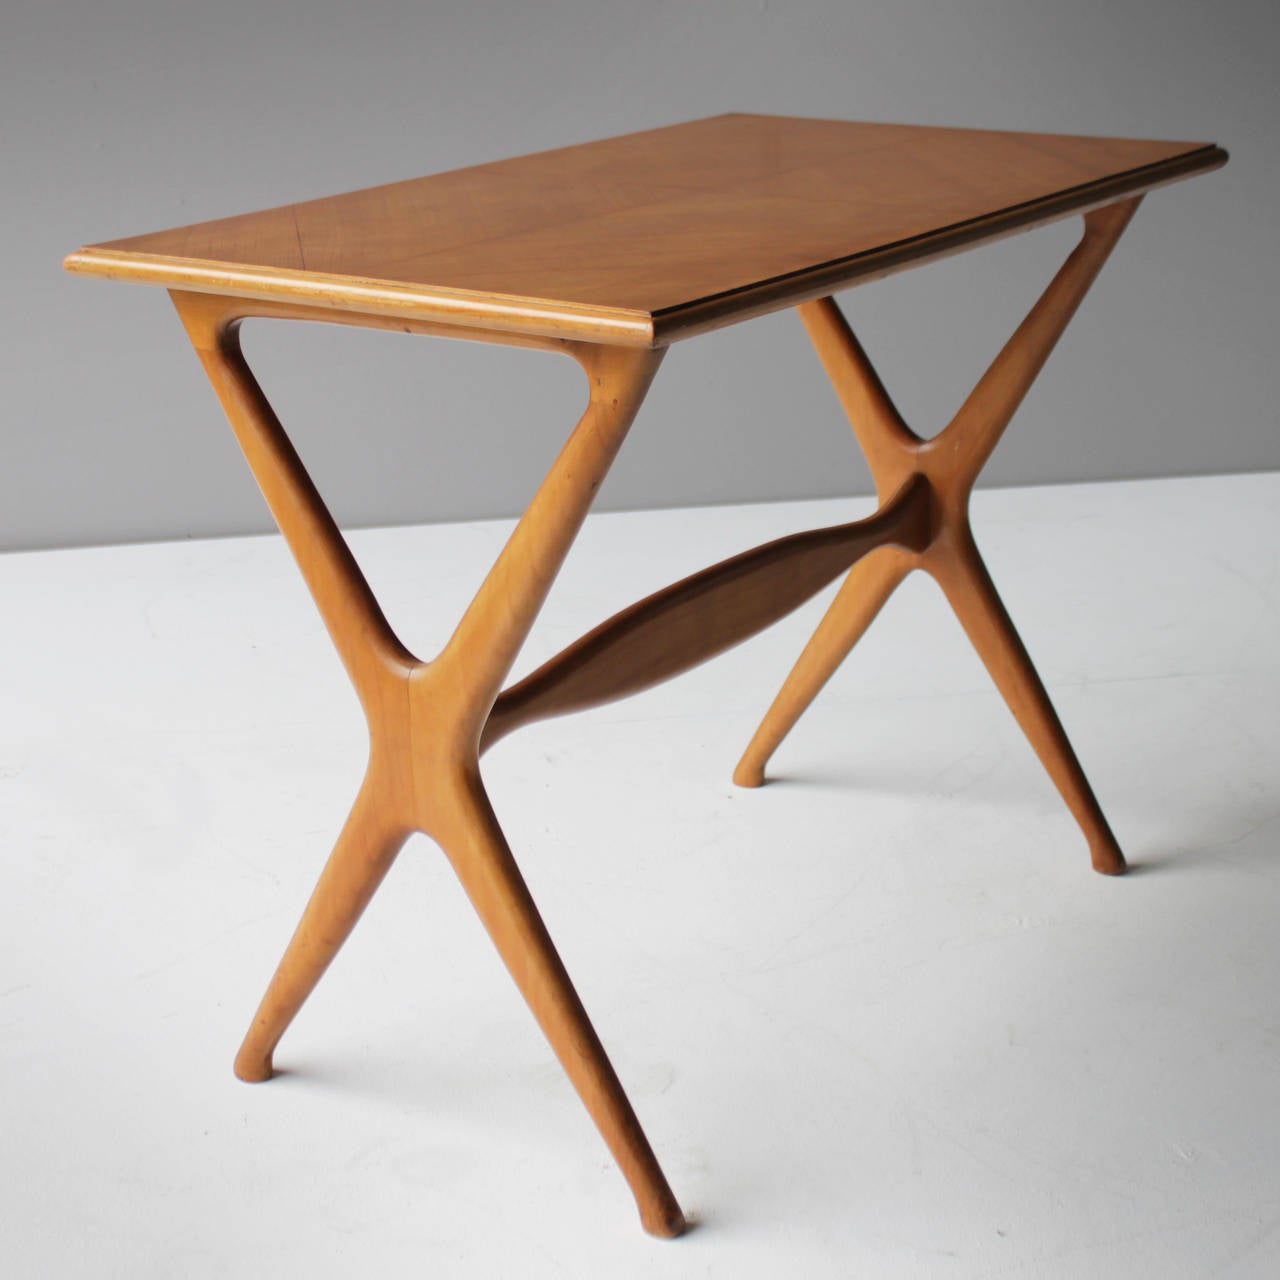 Mid-20th Century Side Table Attributed to Gio Ponti for Domus Nova